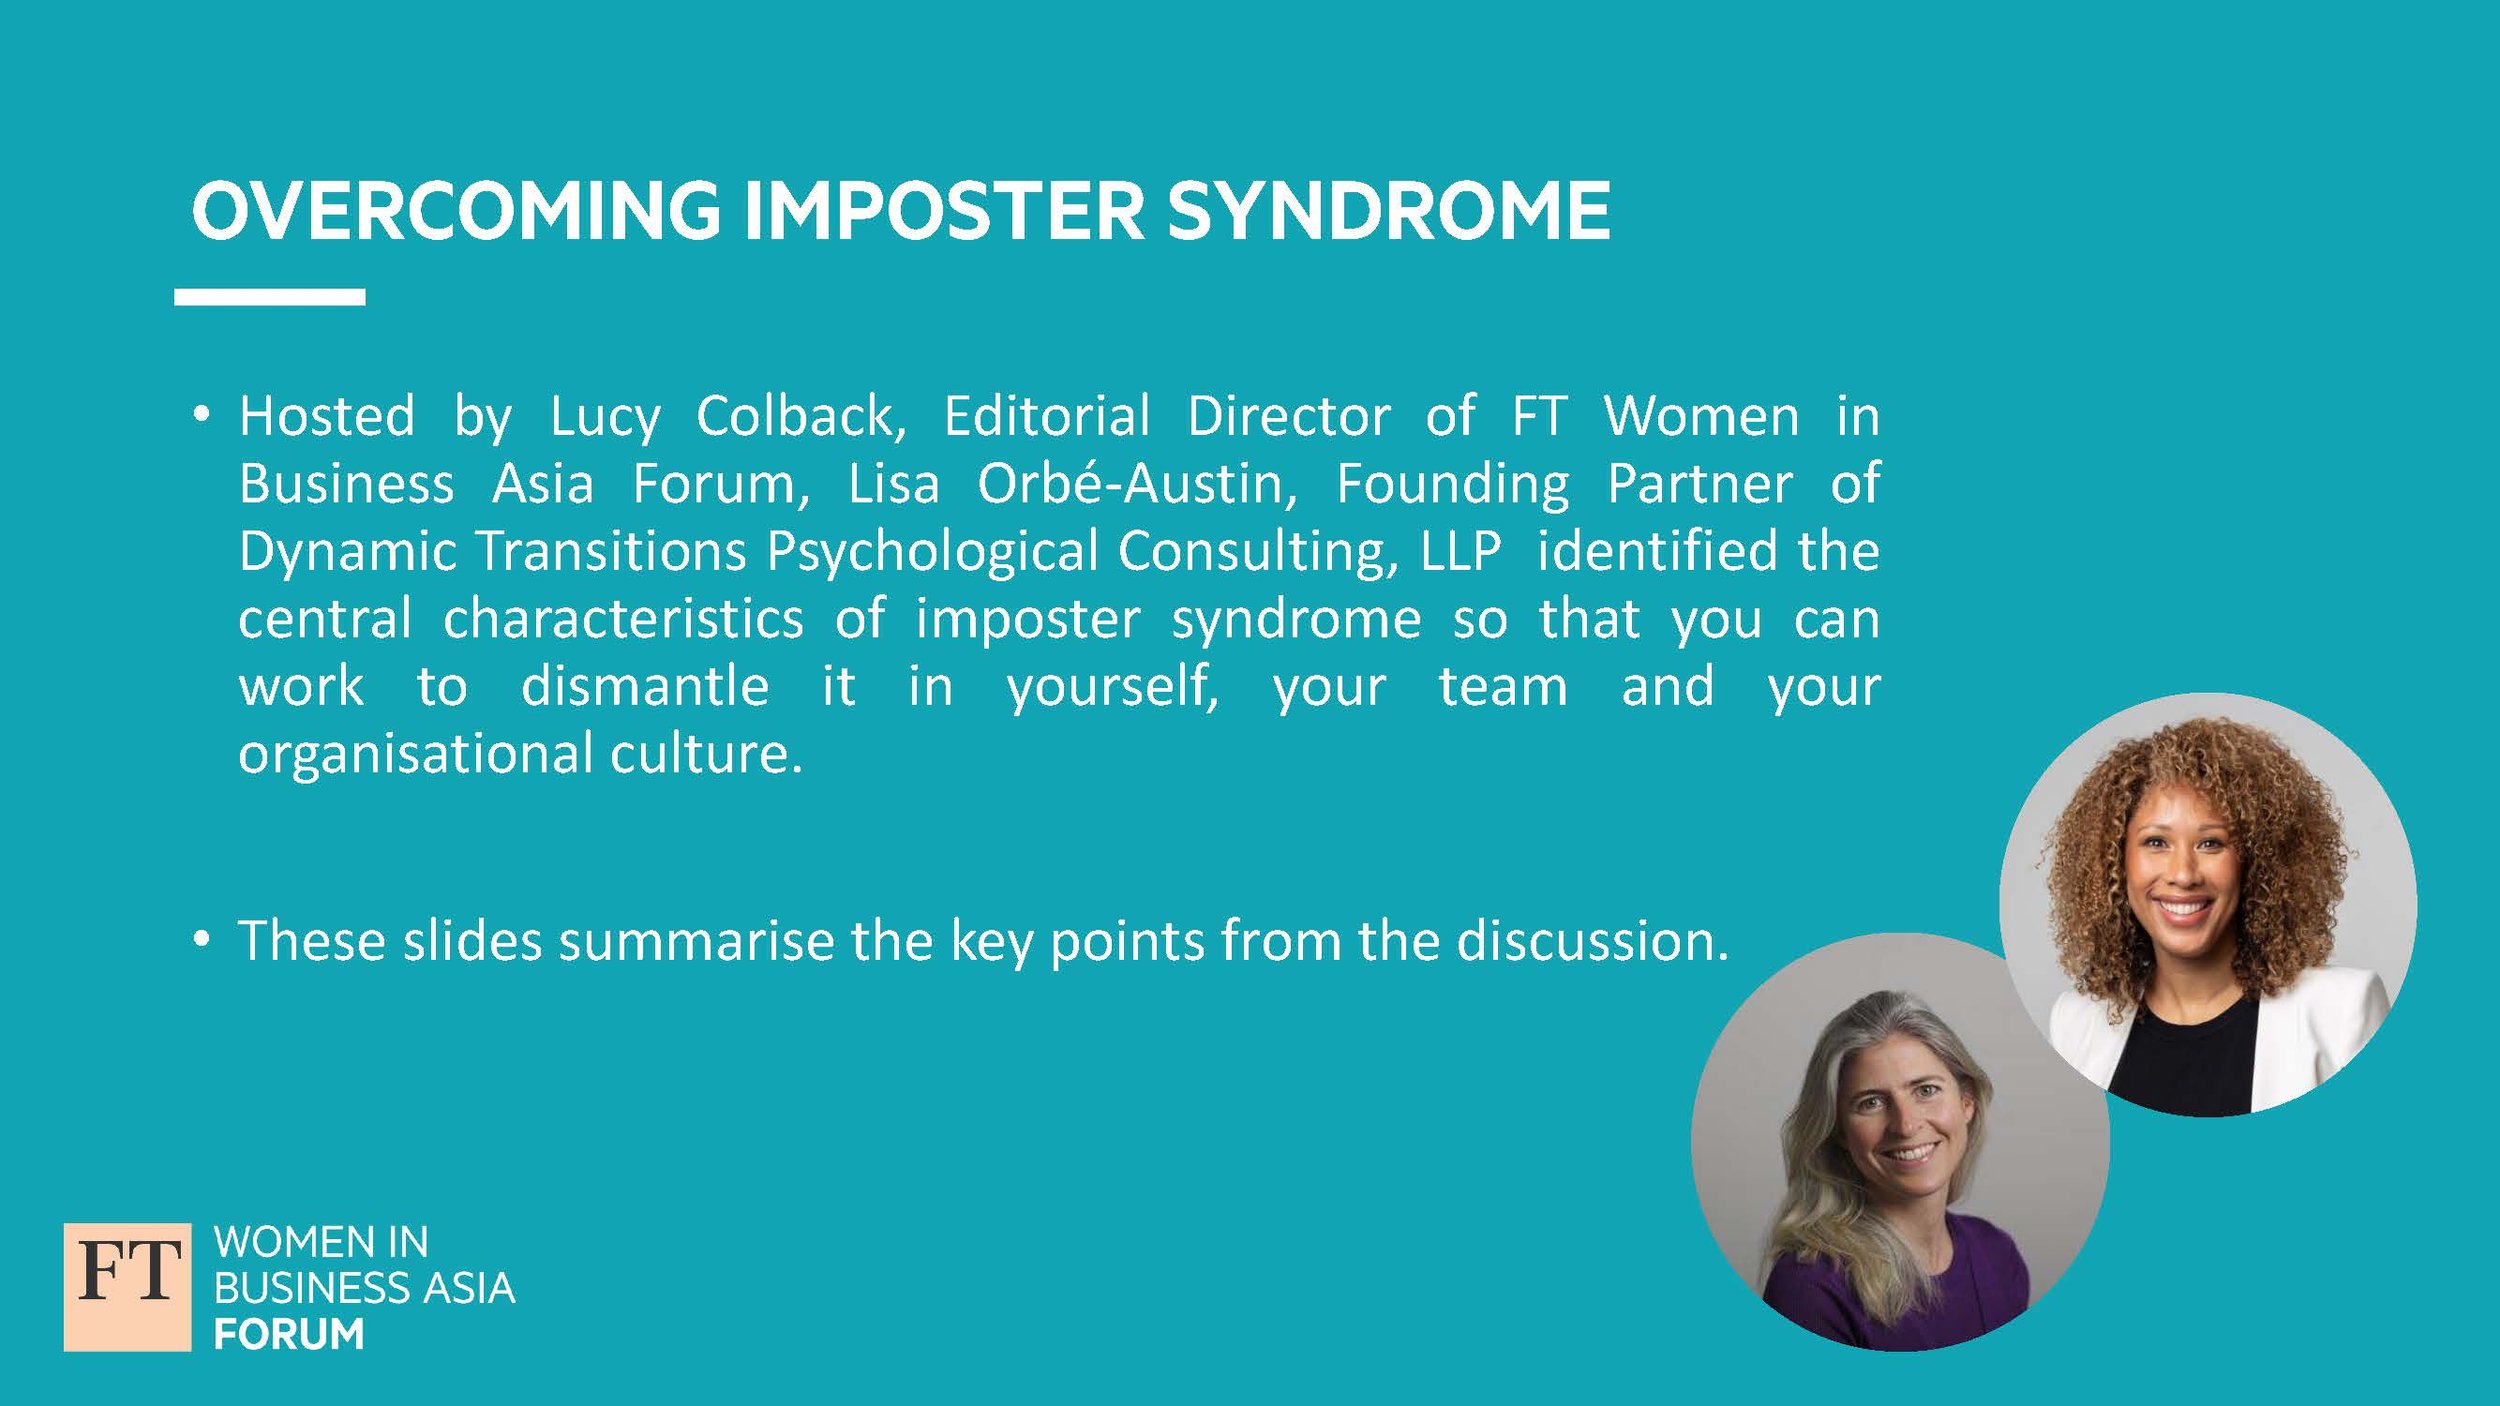 WIBAF_Overcoming Imposter Syndrome_Slides_Page_02.jpg